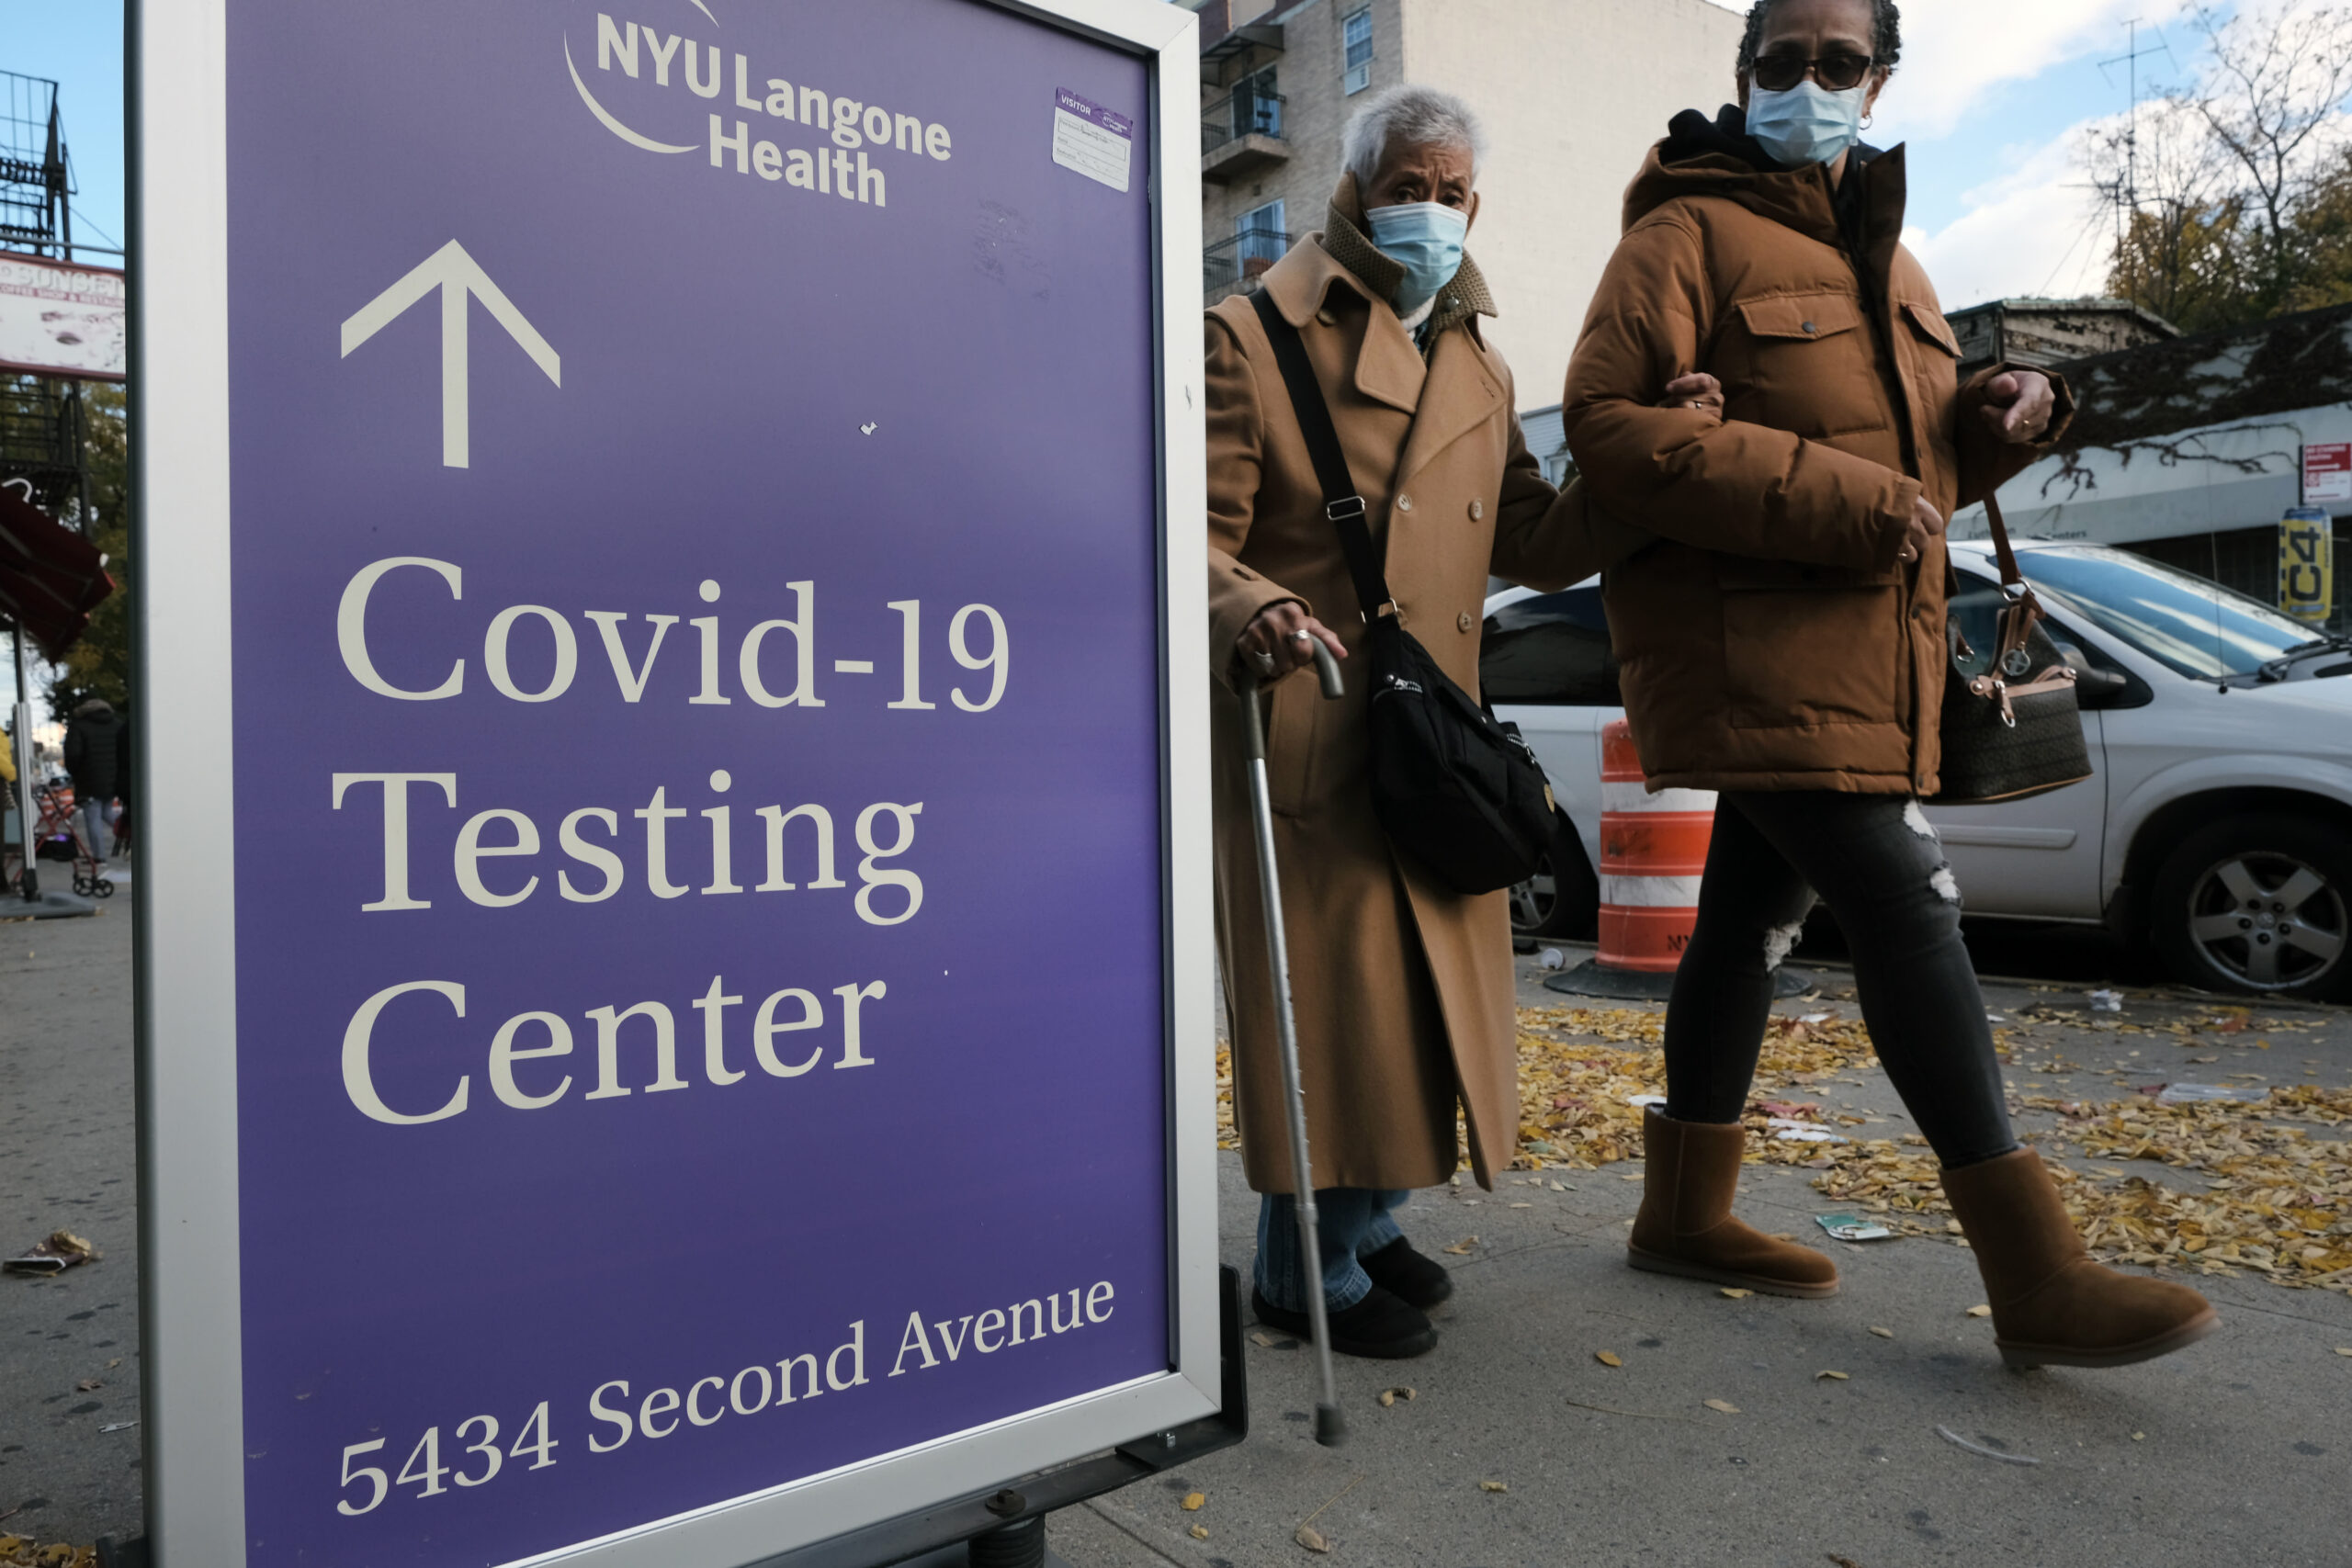 New York officials confirm 5 cases of omicron Covid variant in NYC metro area